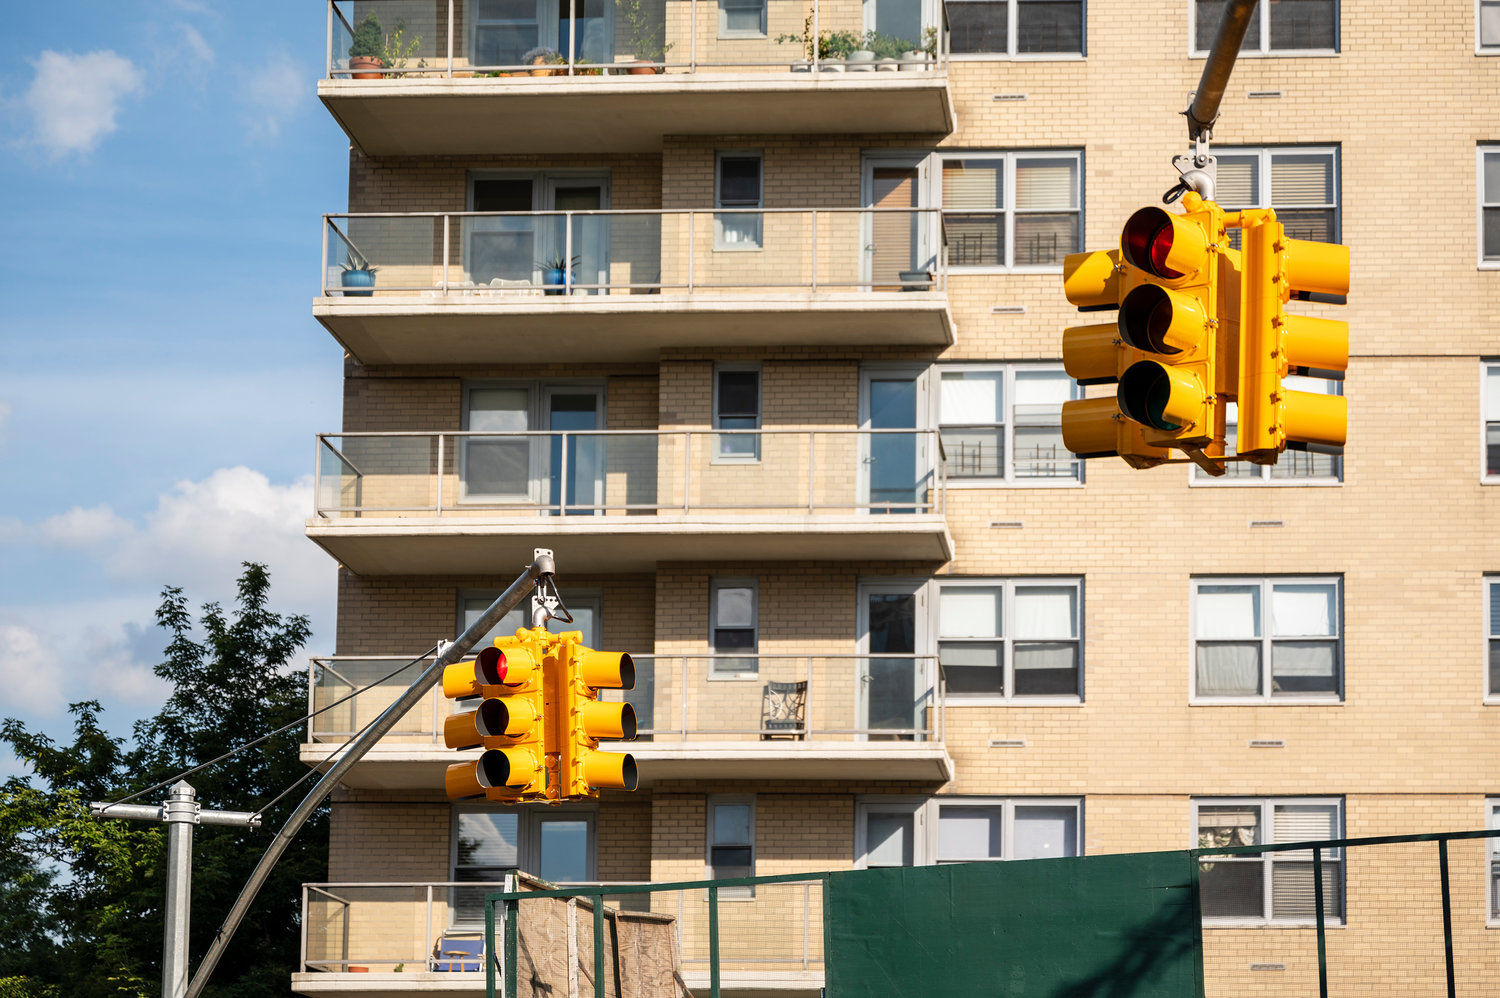 Councilman Eric Dinowitz and Assemblyman Jeffrey Dinowitz celebrated the installment of a traffic signal at Kappock Street and Johnson Avenue on Thursday after a long battle for pedestrian safety. The lights were in full operation Friday, Aug 5.